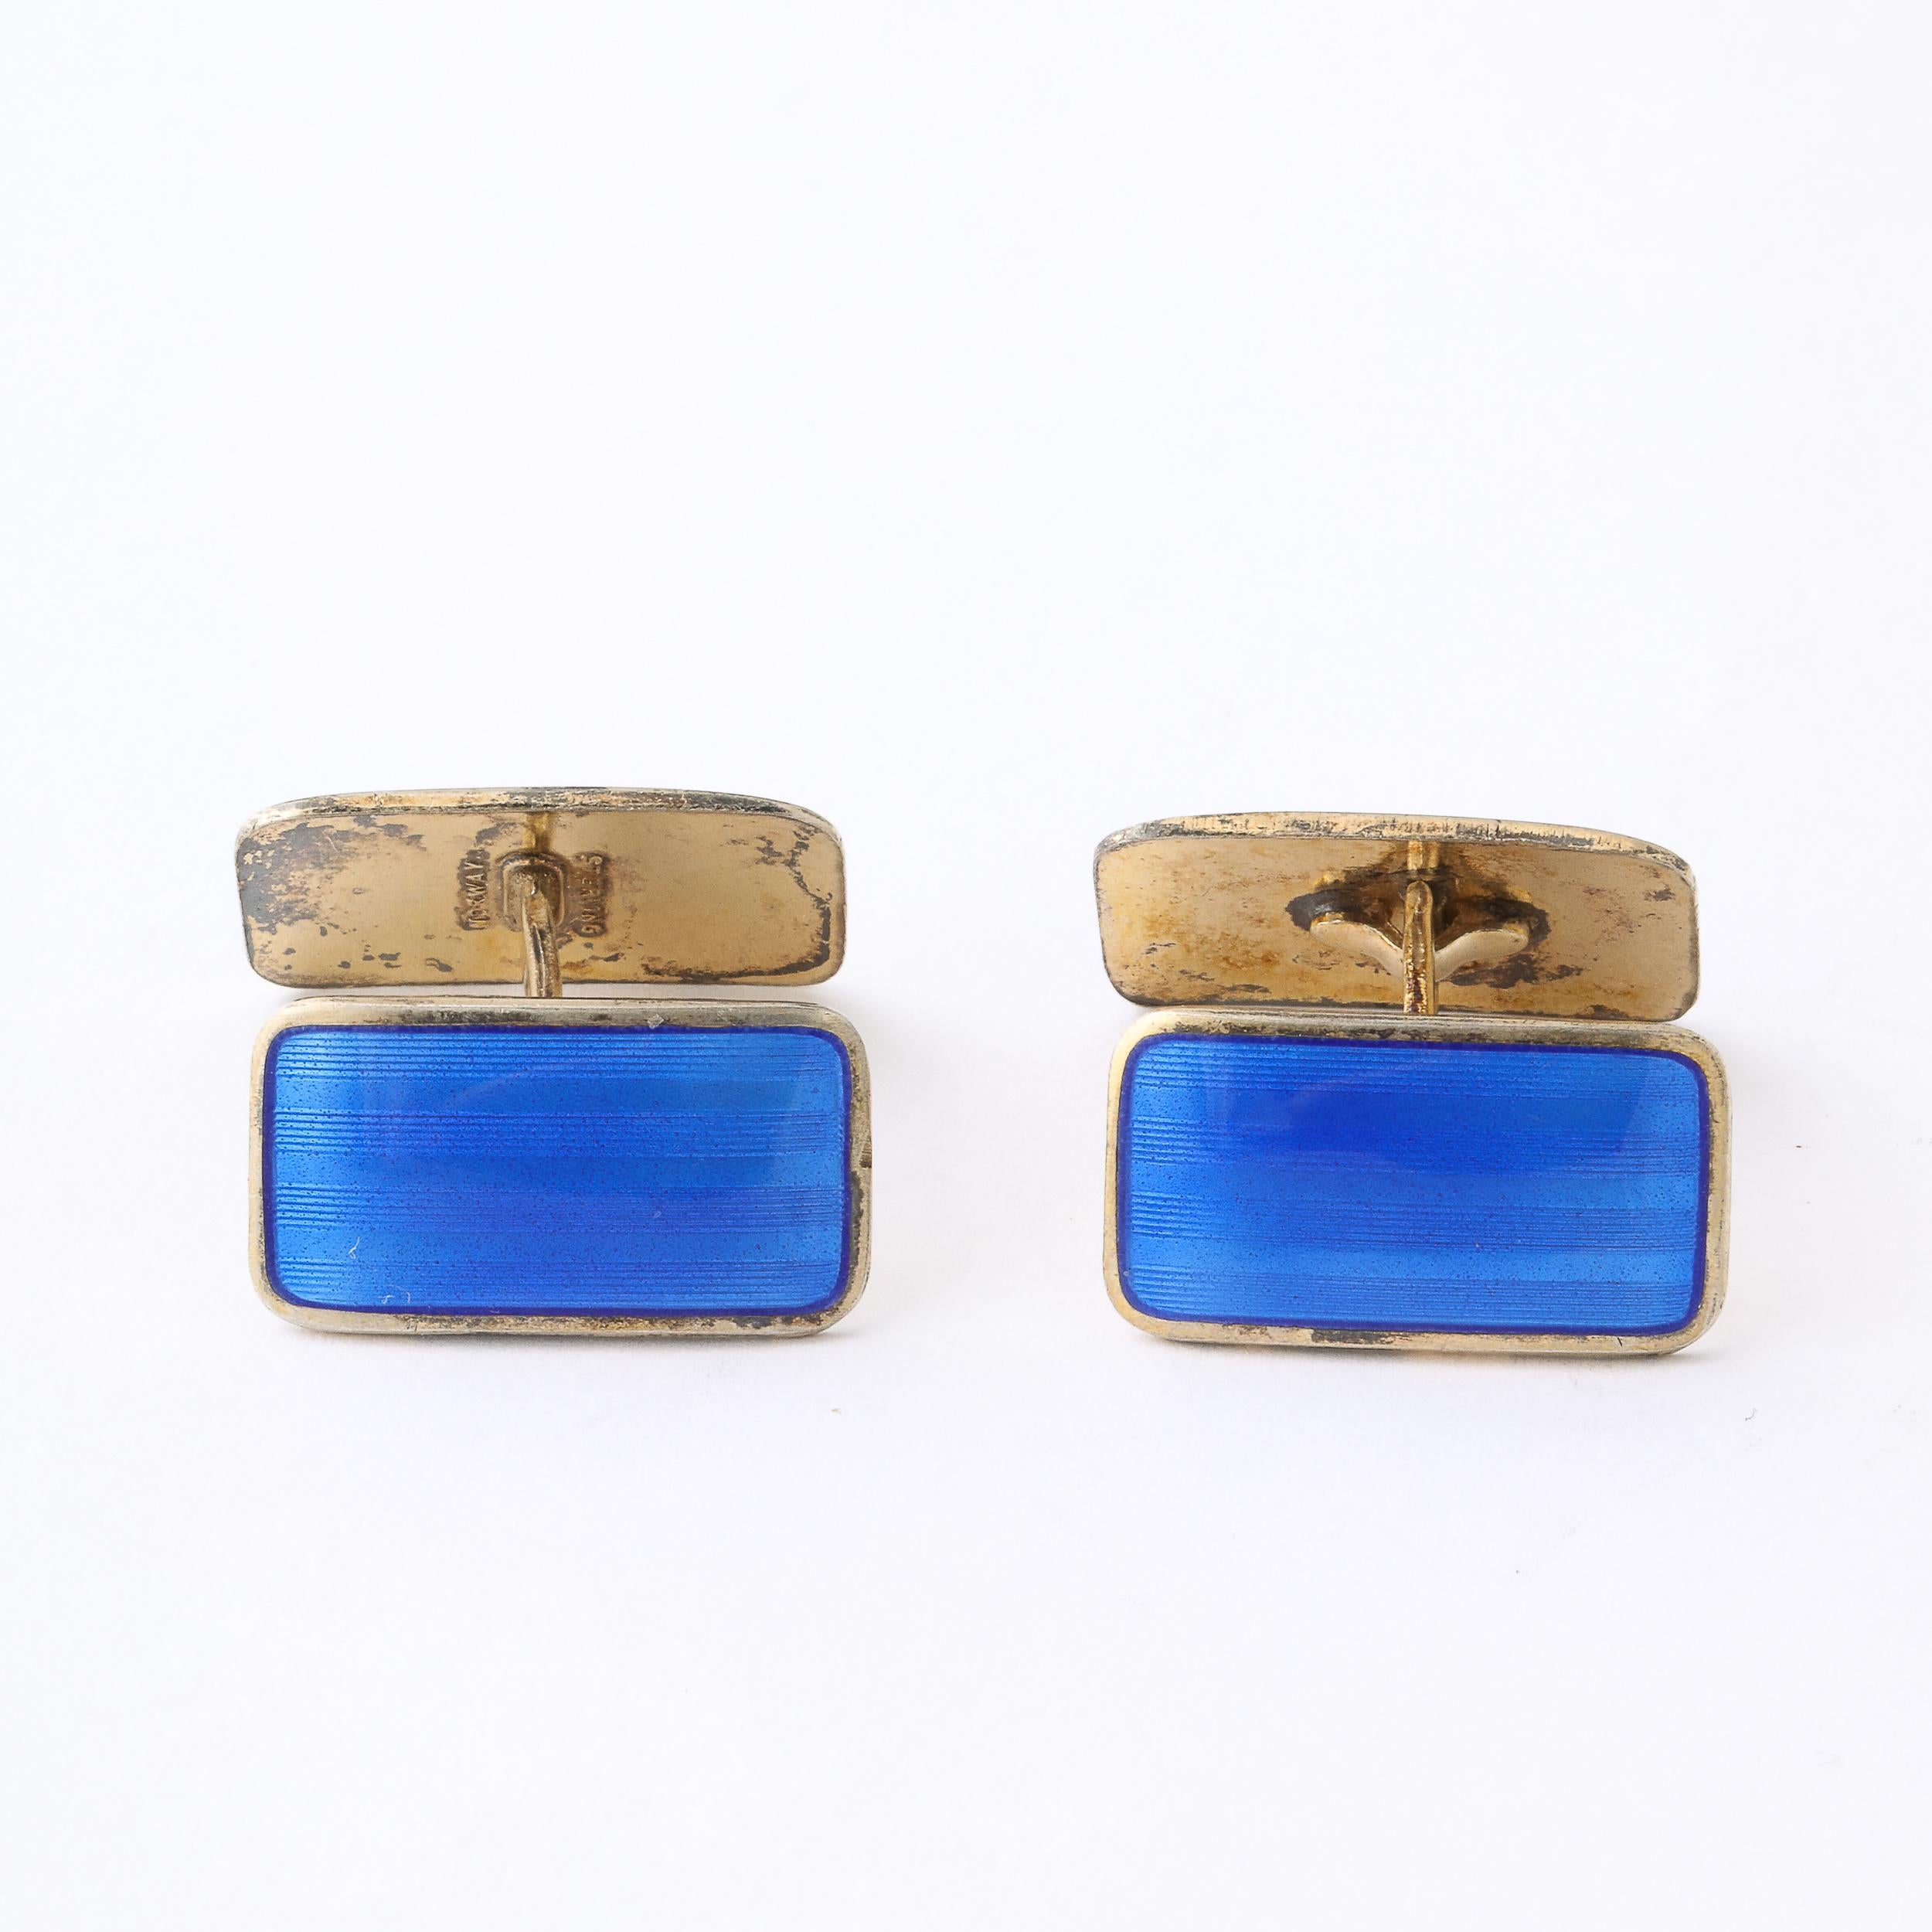 These very elegant pair of Art Deco sterling Silver and lapis blue guilloche enamel cufflinks are by Ansel Holmsen of Sandefjord of Norway .The rectangular cufflinks are double sided ,the design is the same on both sides.The tops are connected with